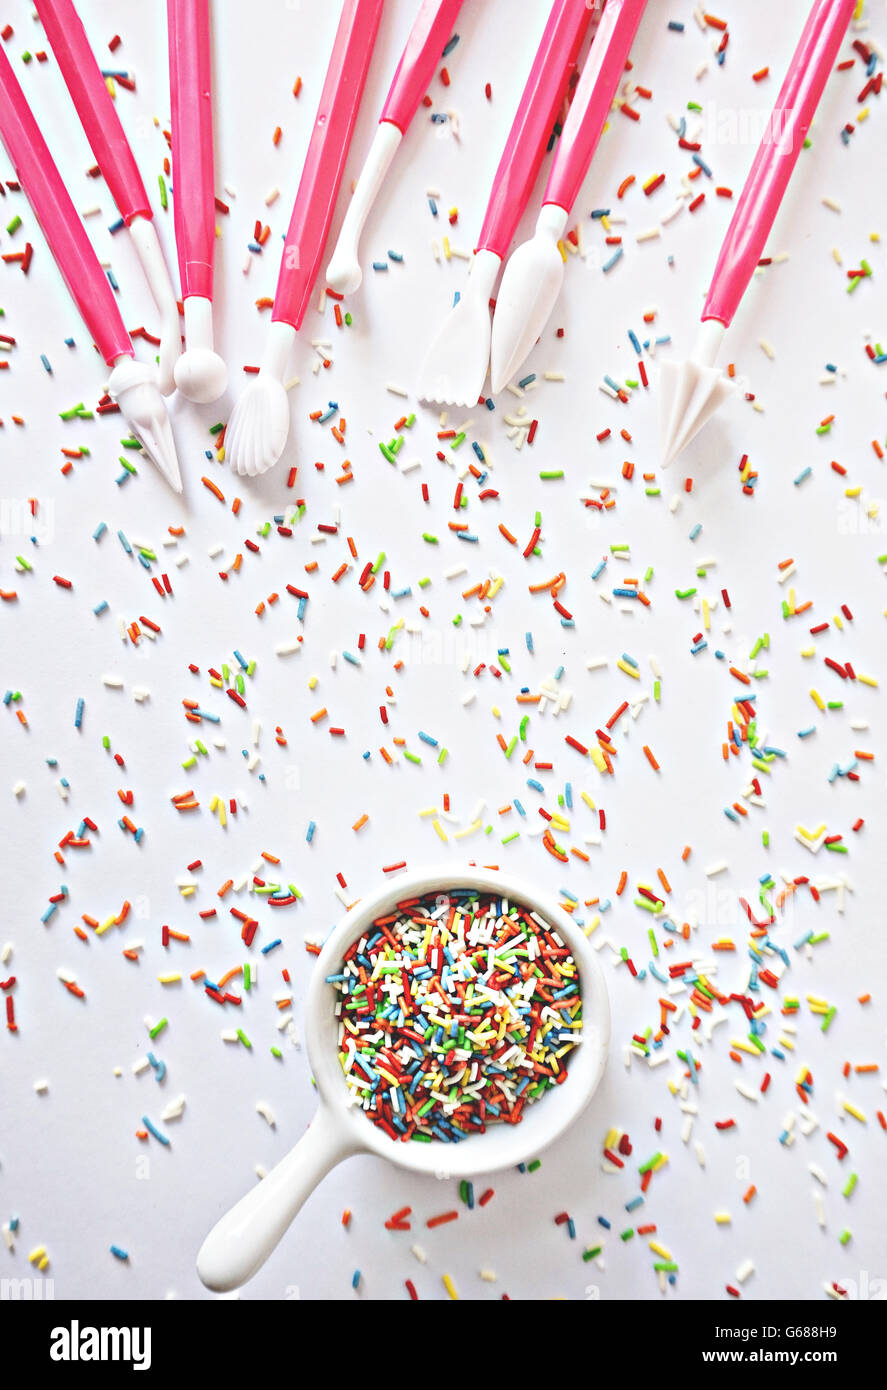 Cenital of sprinkles and cake's decoration tools in a white background Stock Photo